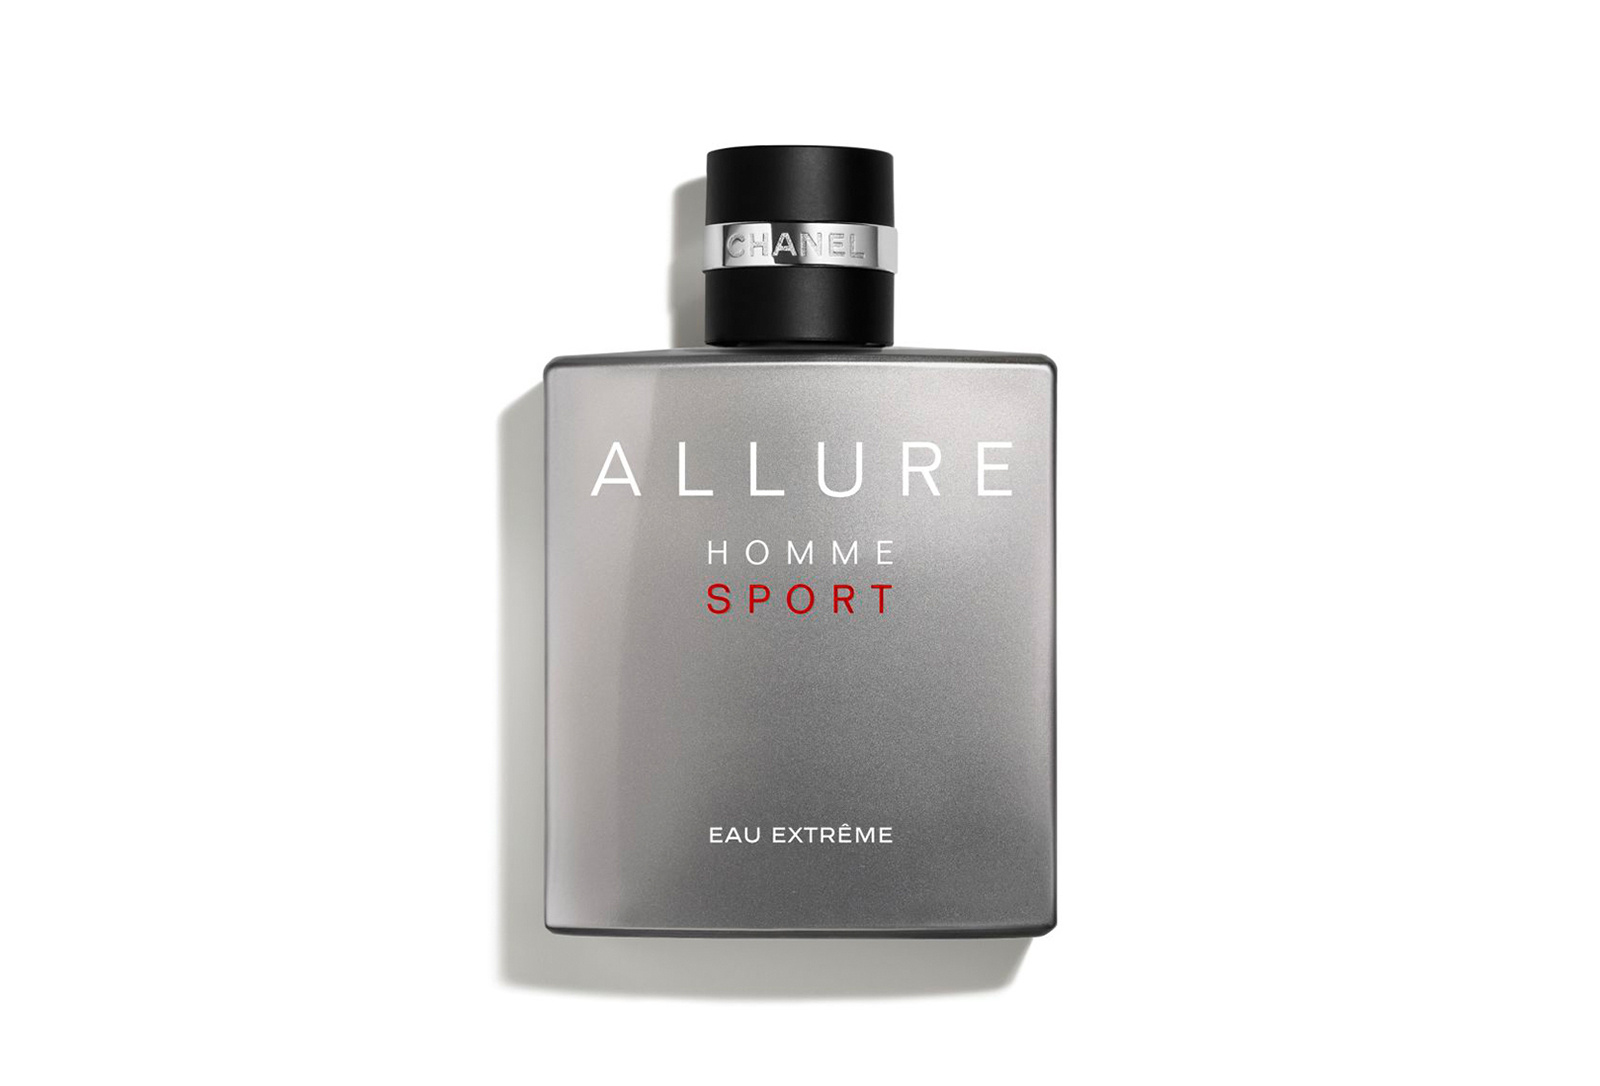 Вода парфюмерная Chanel Allure Homme Sport Eau Extreme мужская, 50 мл yiqixin smart remote for land rover lr2 lr4 evoque sport discovery 4 freelander 2012 2013 2014 2015 2016 2017 2018 id46 chip fob